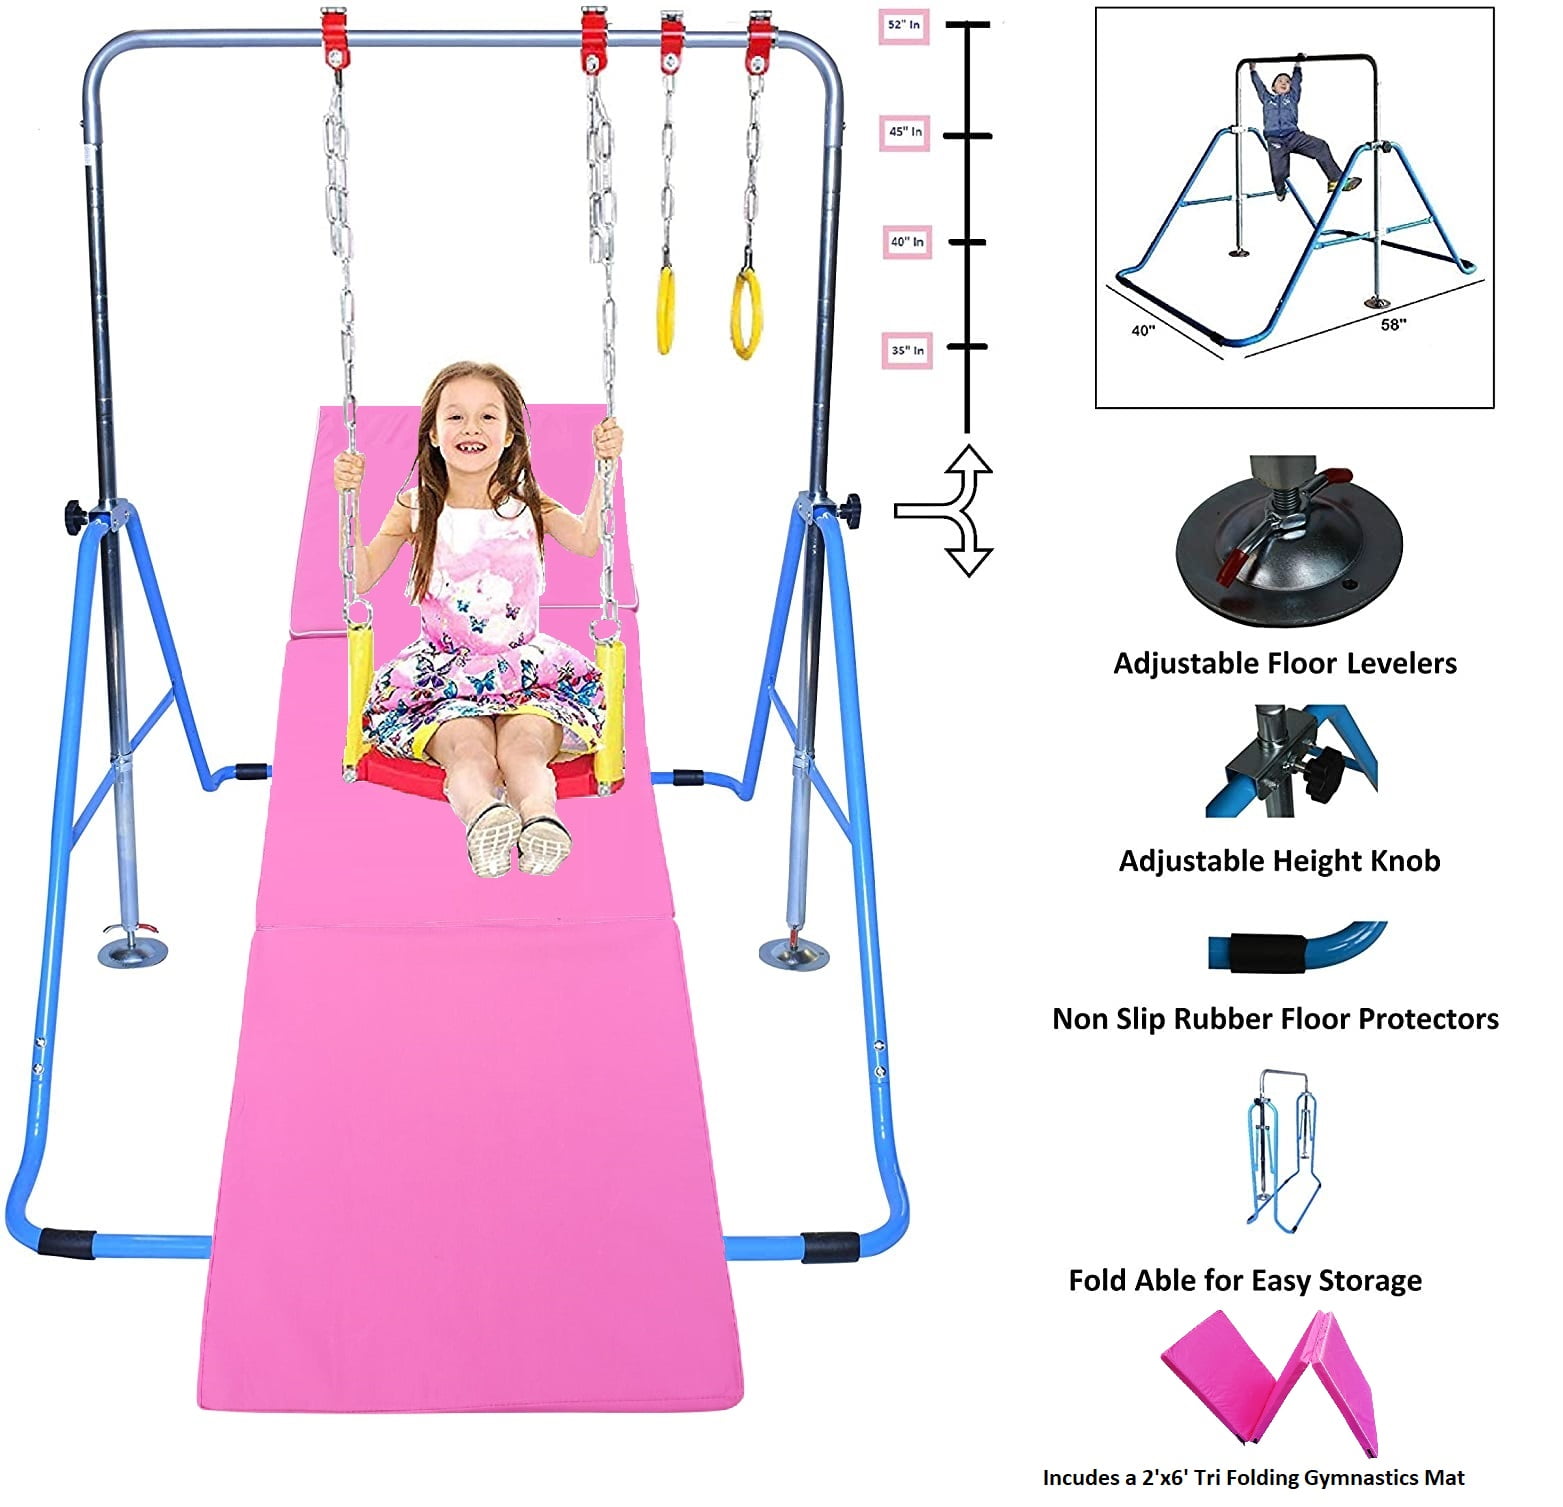 Swing Seat Pink Gymnasts Expandable Junior Training Bar Indoor Foldable Climbing Tower Playground 2 Trapeze Rings GymPros Kids Jungle Gymnastics 4 in 1 Monkey Bars 